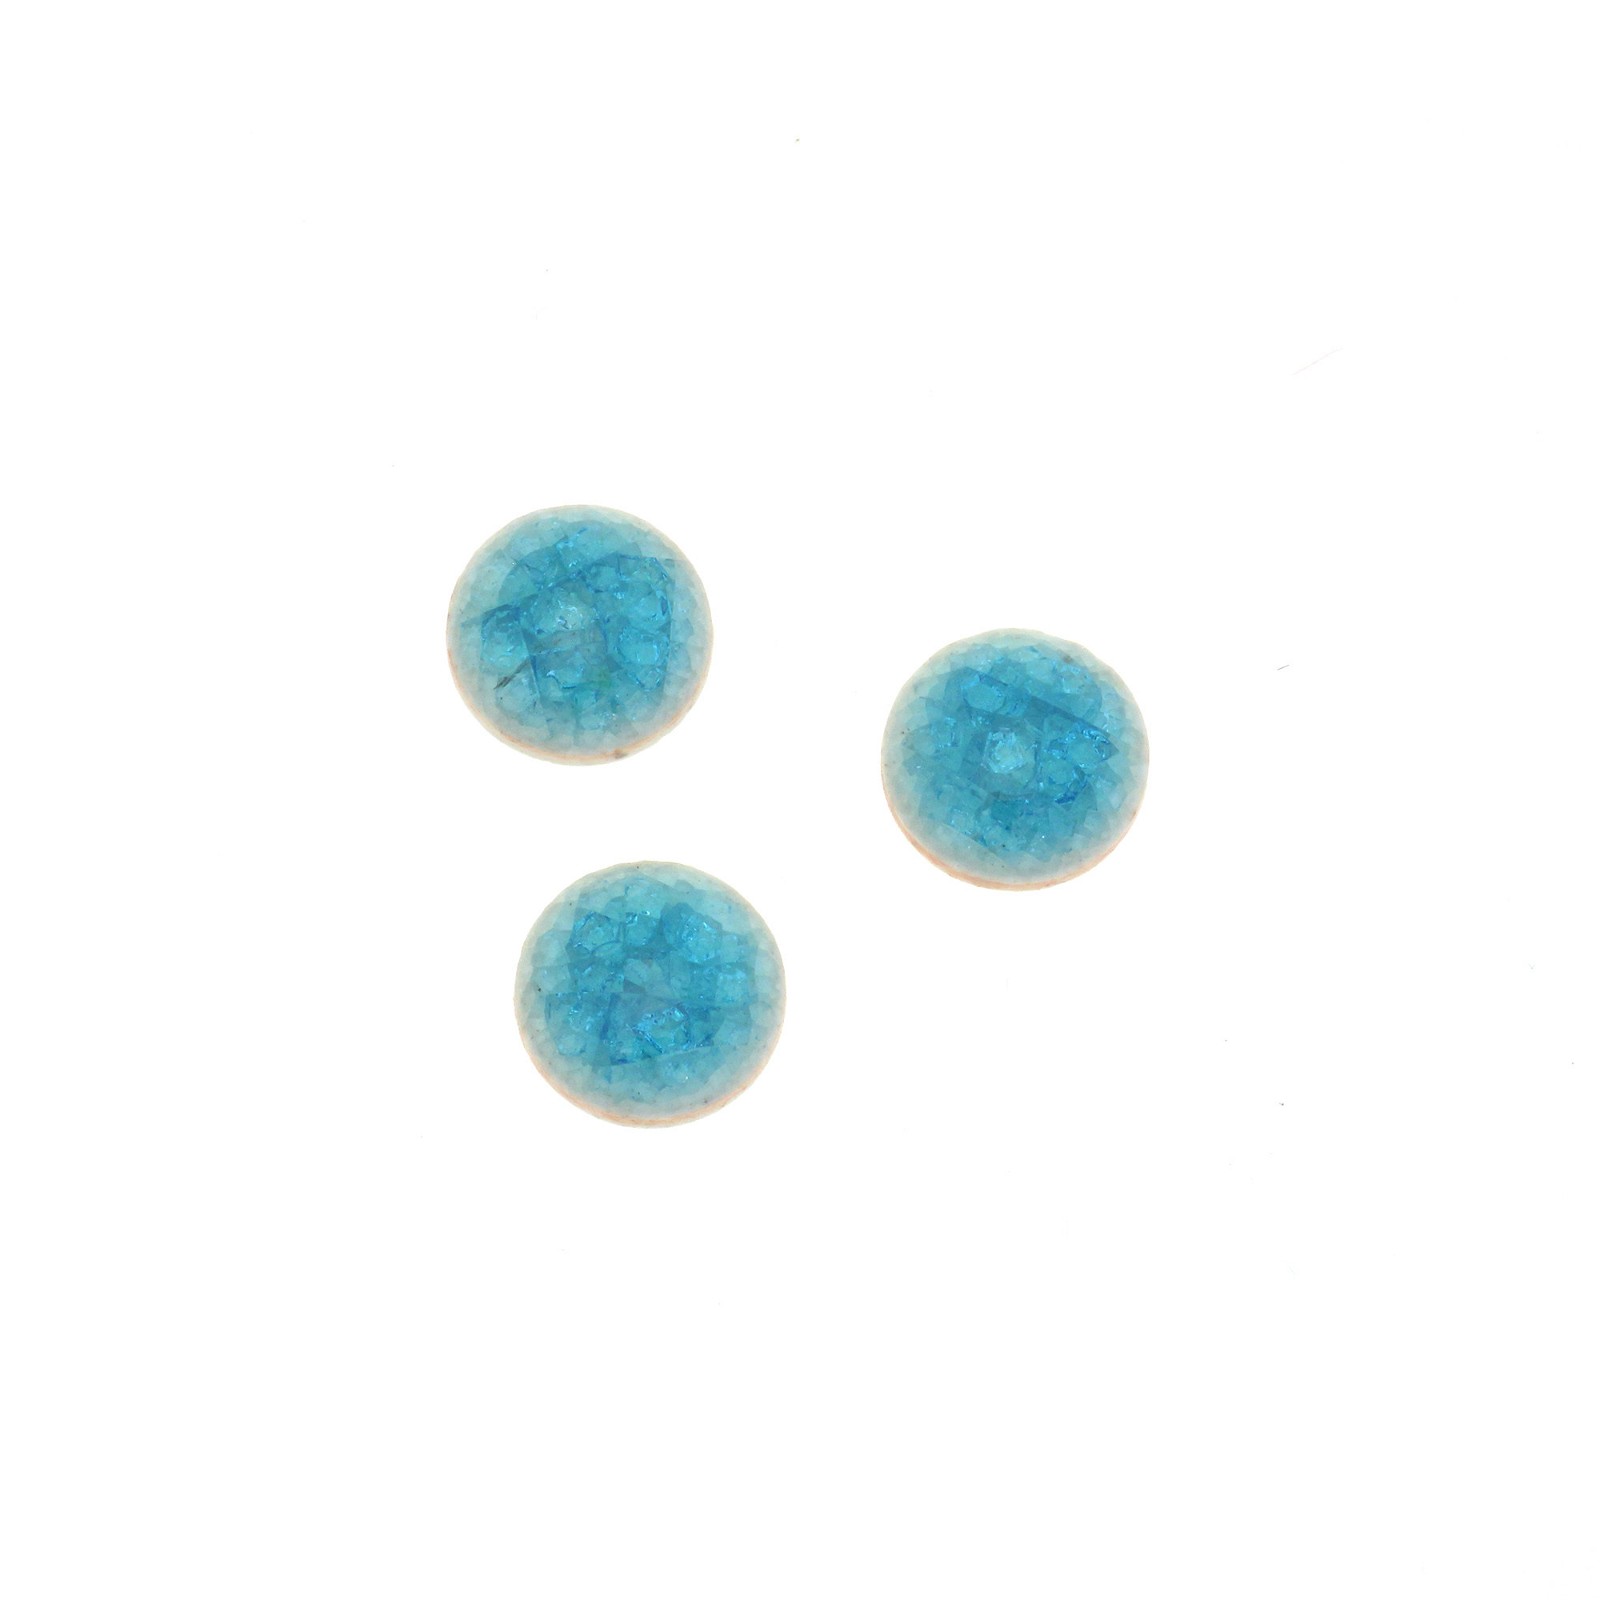 Round turquoise ceramic cabochons 12mm 1pc KBCZ1206